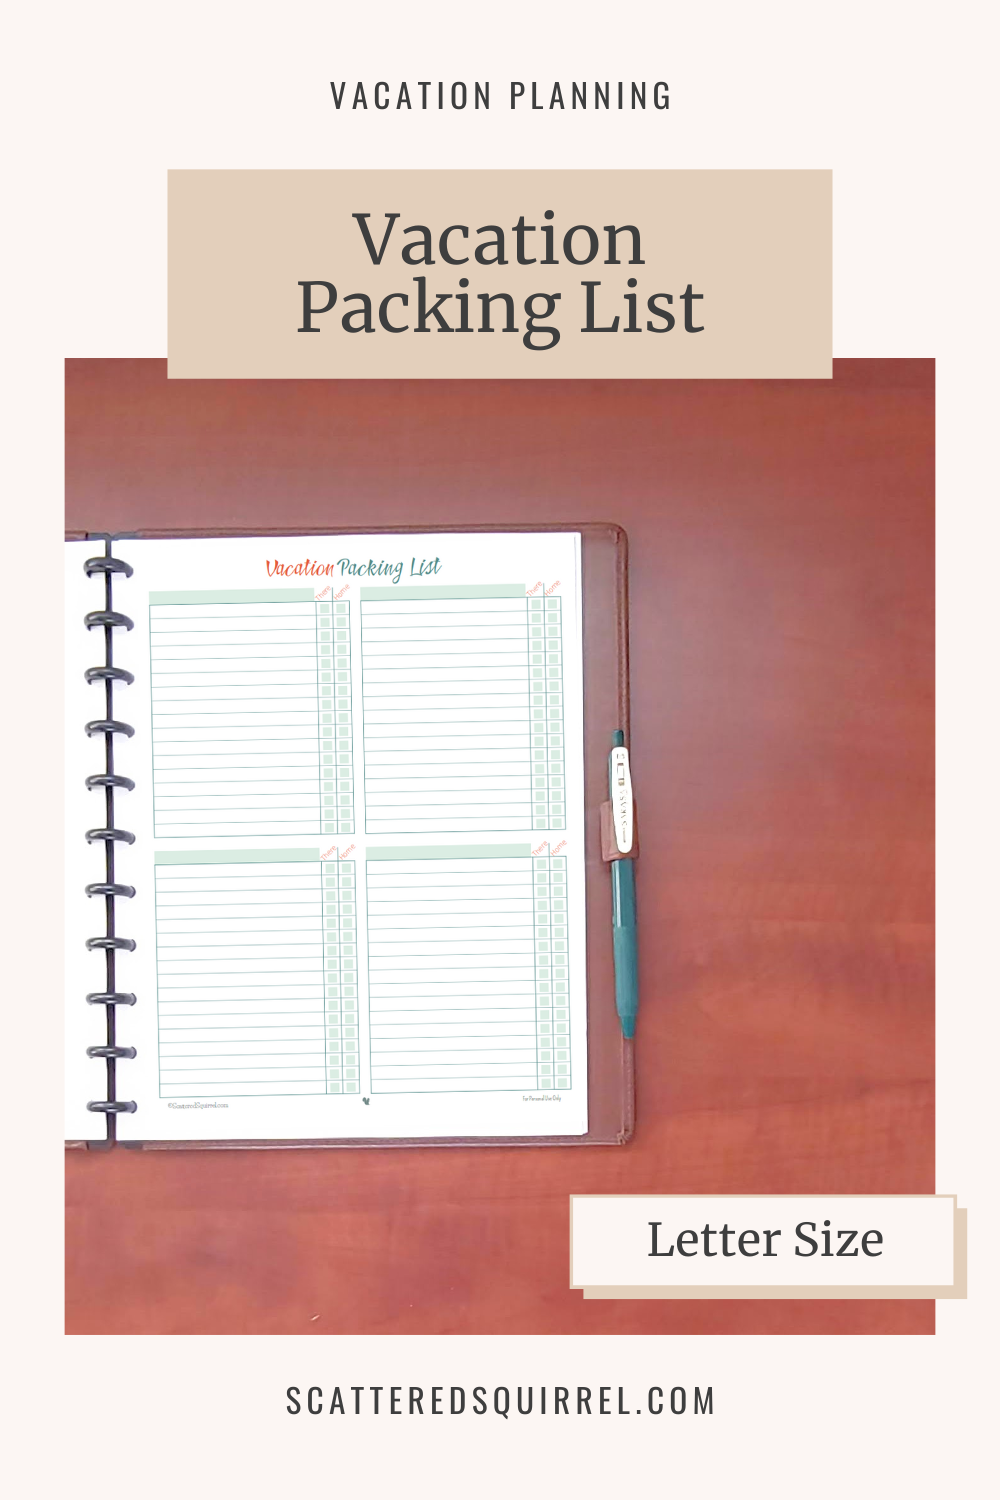 This image links to the letter size, Vacation Packing List printable PDF.